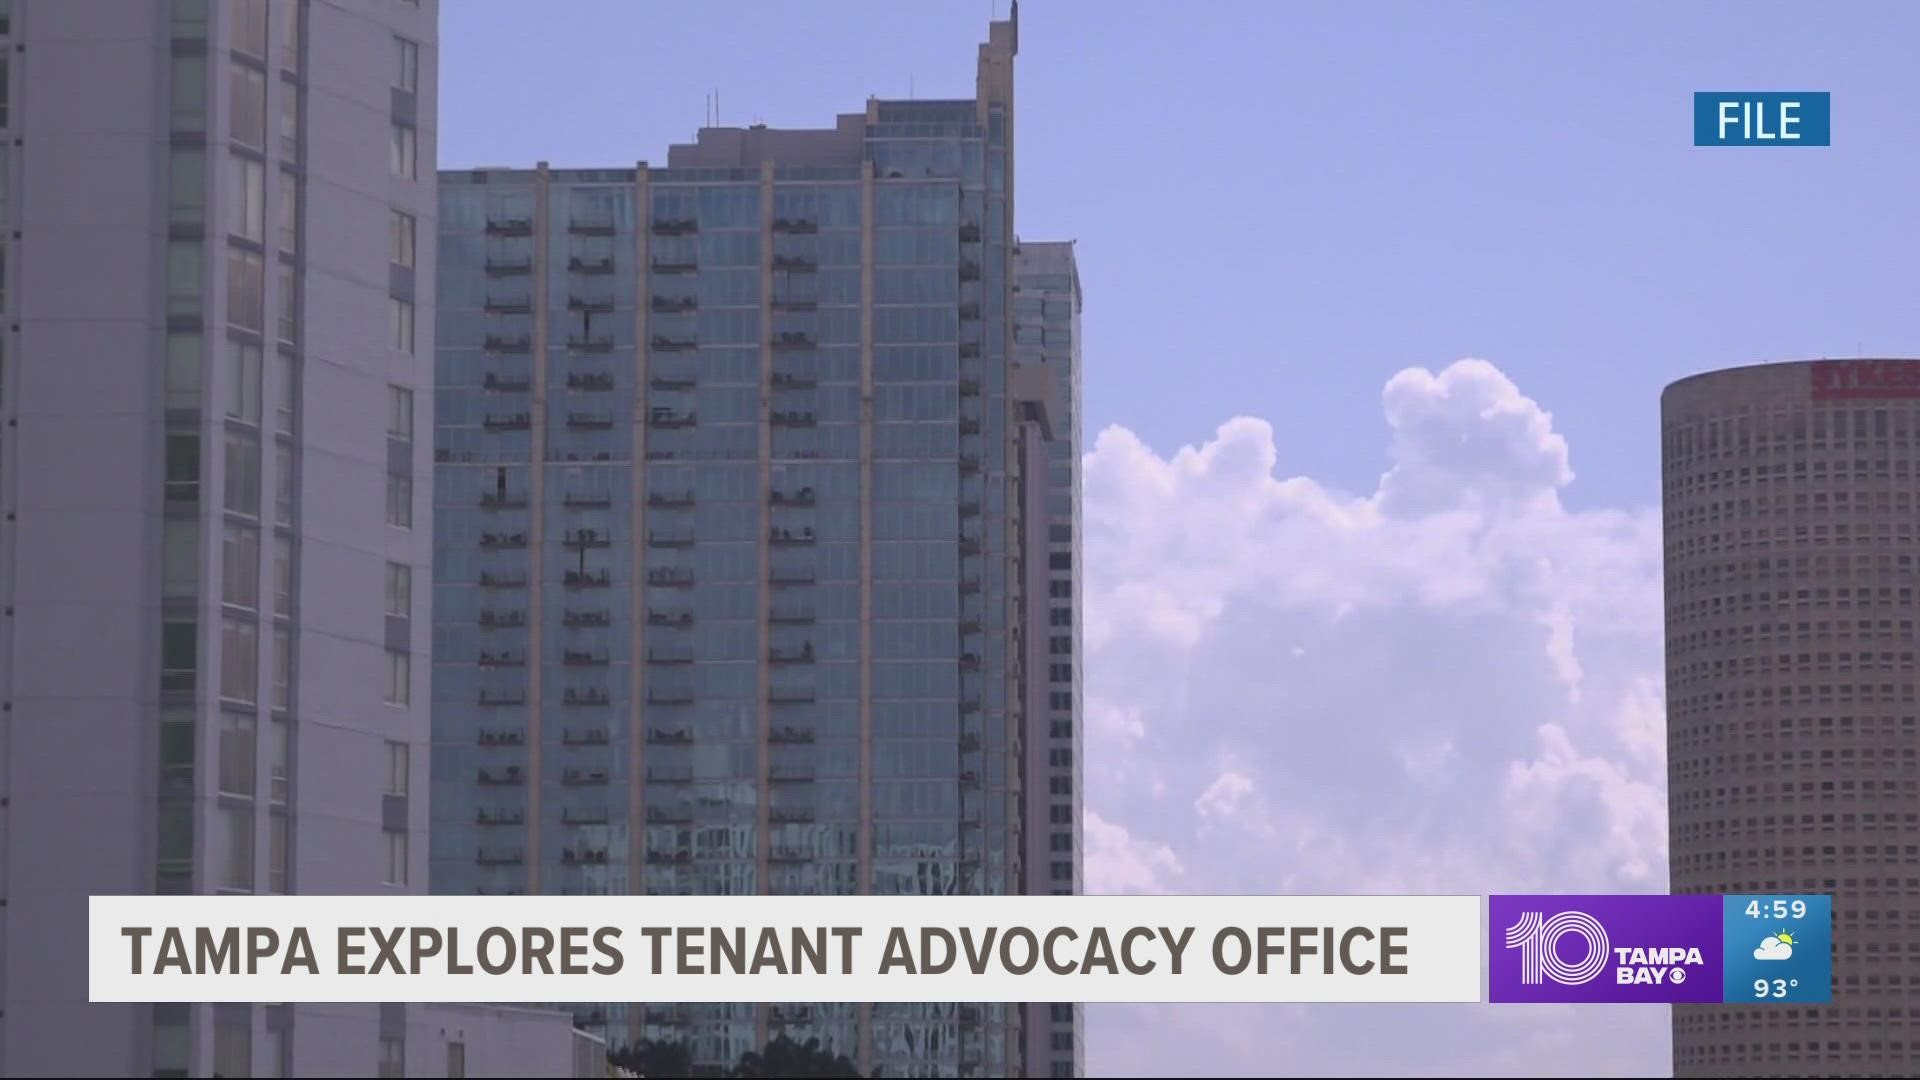 Housing groups pushed to implement the new office, stating it can be too confusing or inefficient to seek help when facing eviction, retaliation or discrimination.